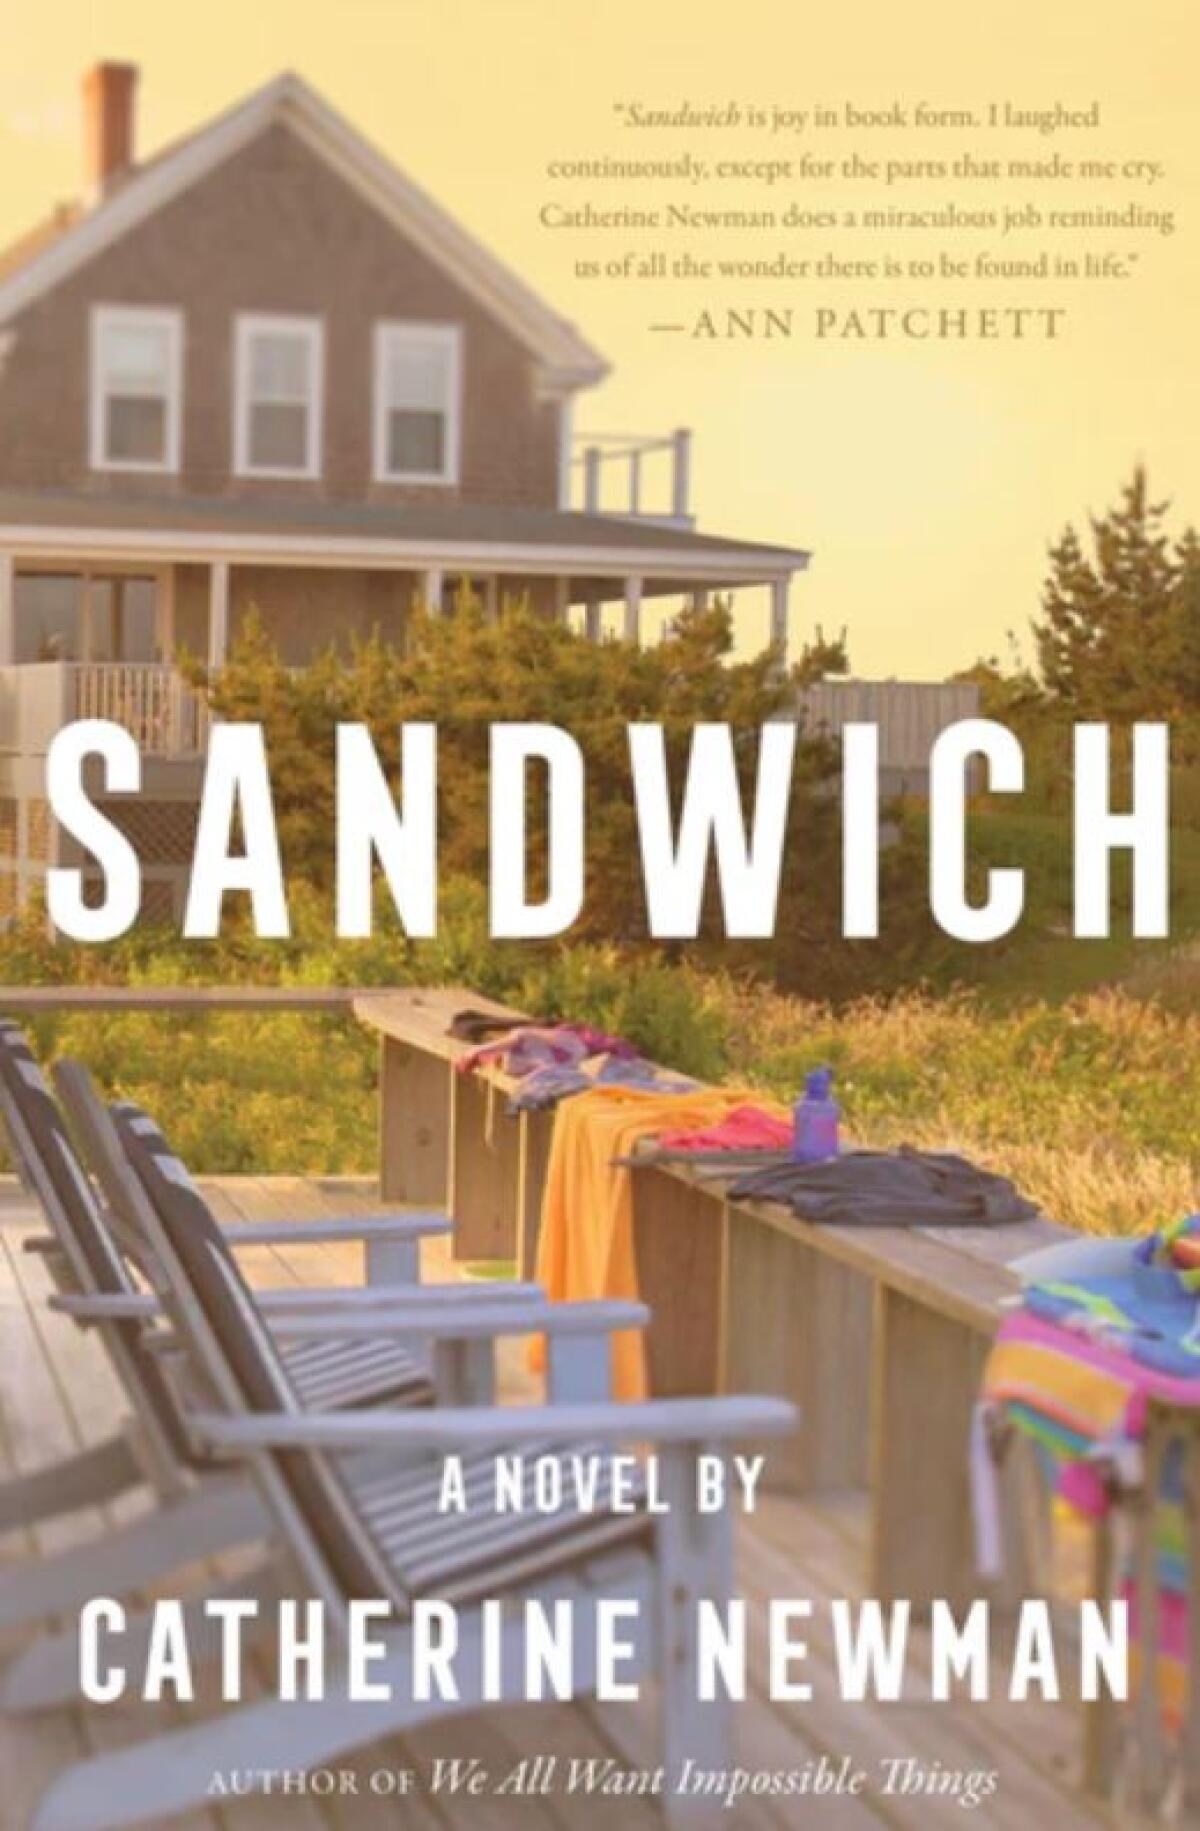 Cover from "Sandwiches"